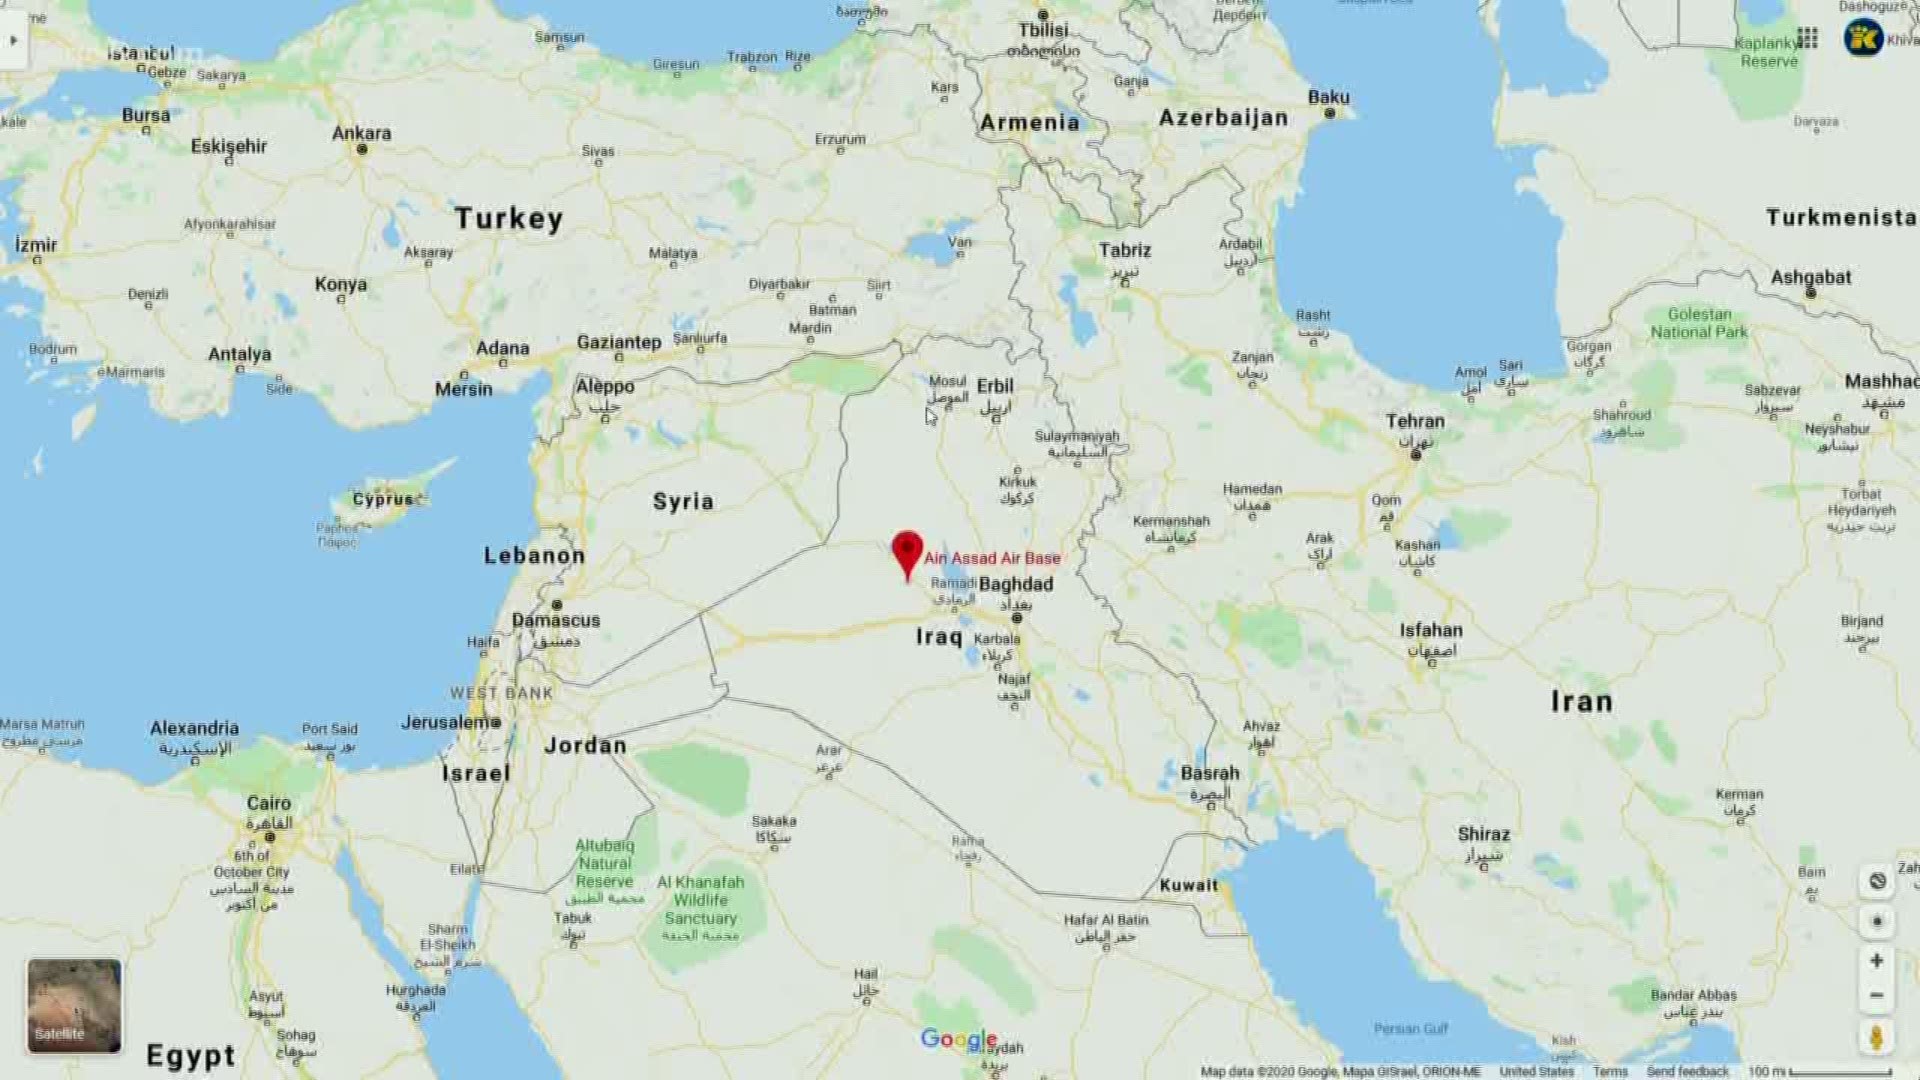 The Pentagon confirms more than a dozen missiles were launched from Iran targeting at least 2 bases in Iraq where U.S. troops are housed.